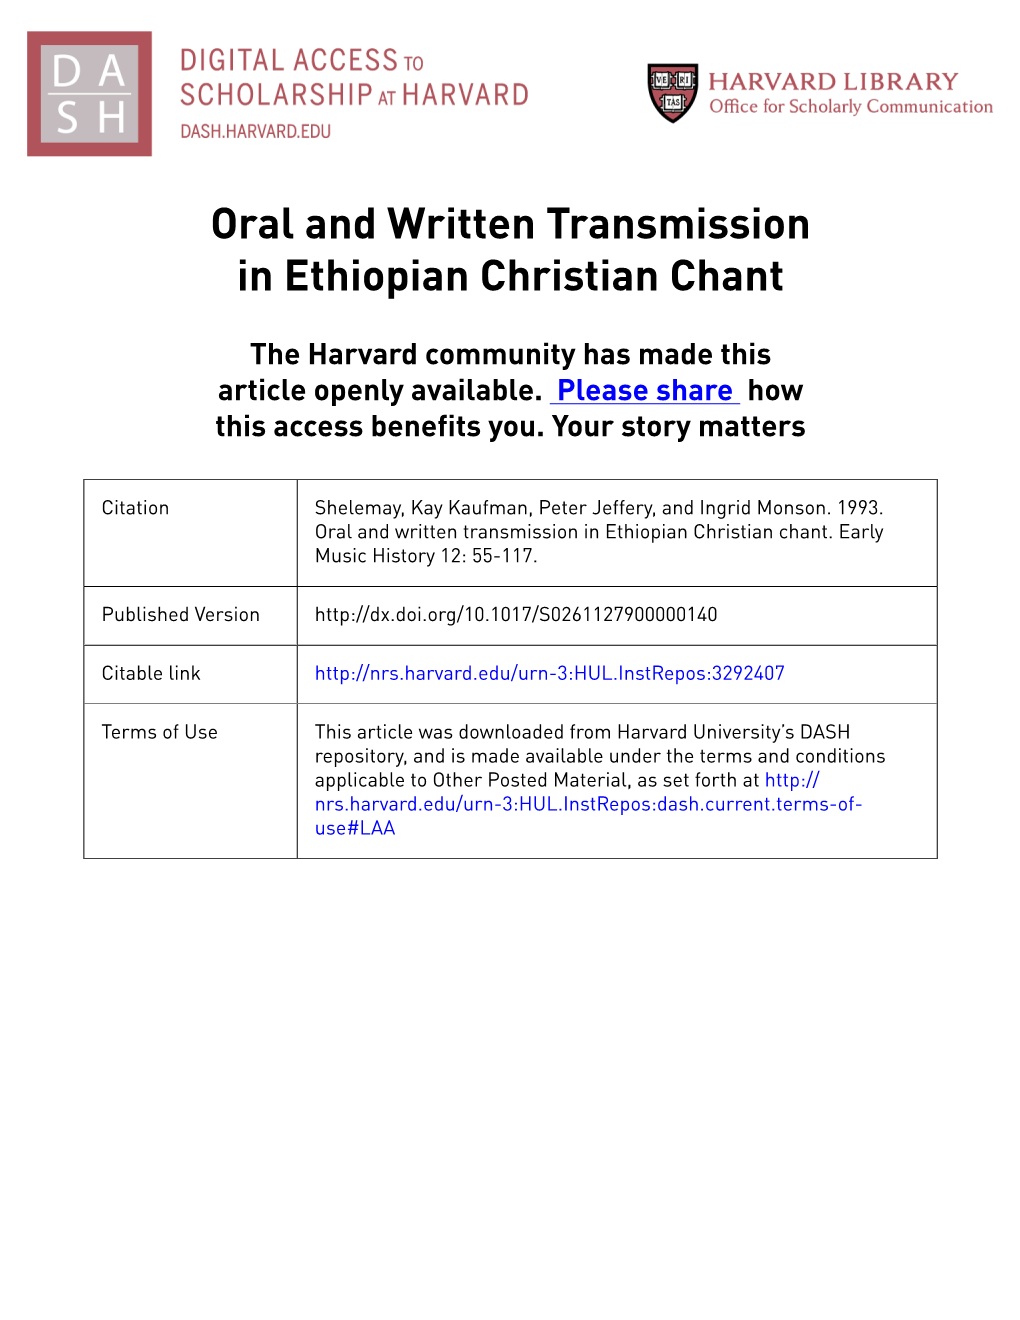 Oral and Written Transmission in Ethiopian Christian Chant